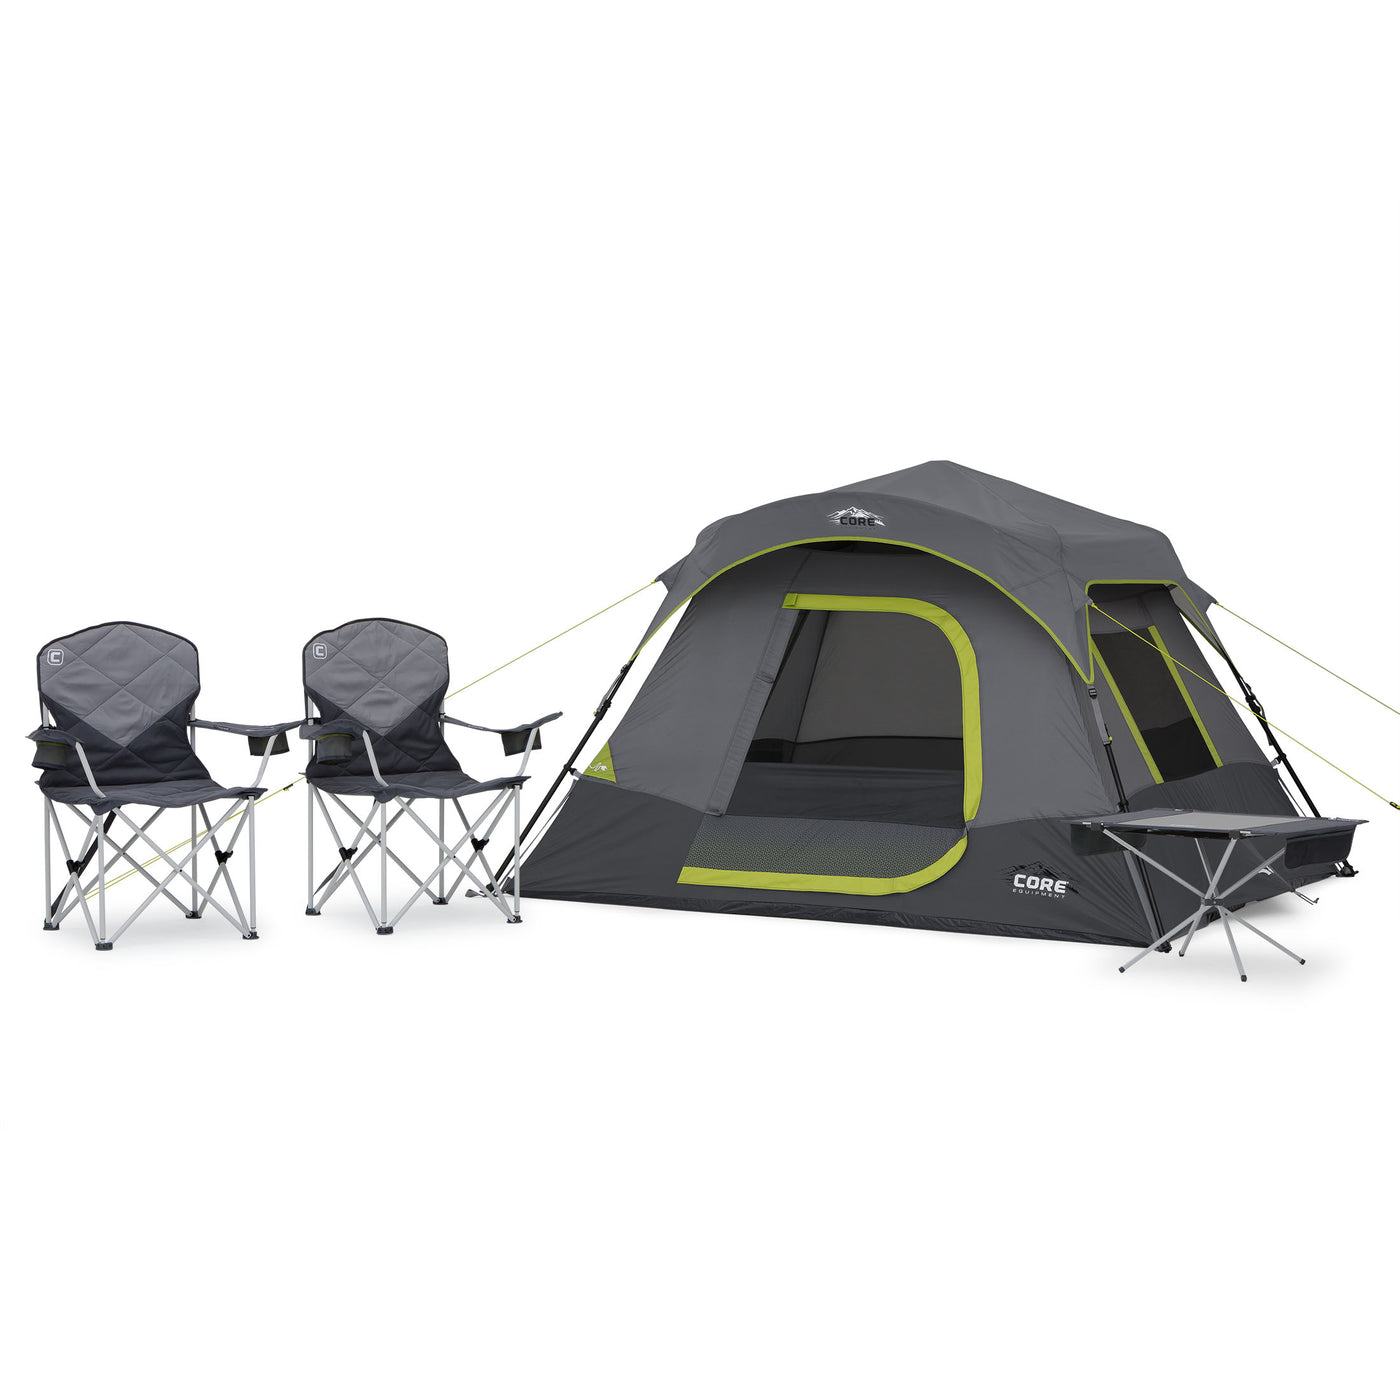 A grey and green CORE 4 person instant cabin tent is set up with its front door closed. To the left of the tent, there are two foldable camping chairs. To the right of the tent is a small, foldable table. The tent, chairs and table are placed on a simple white background.